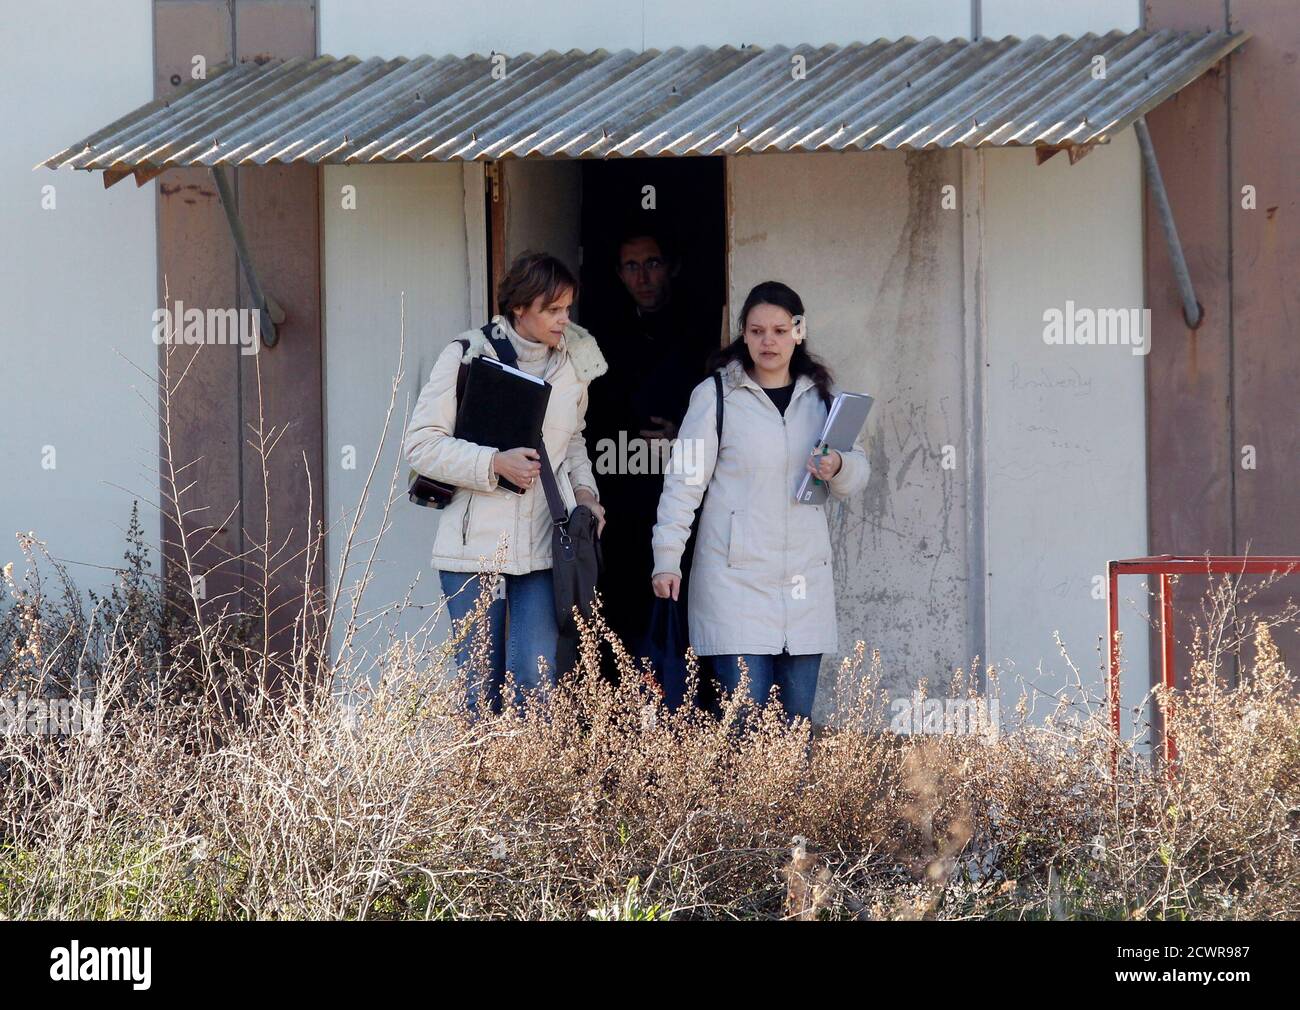 French judge Annaick Le Goff (L) and an assistant leave after a search at the now defunct French company Poly Implant Prothese (PIP) in La Seyne-sur-Mer near Toulon January 4, 2012. PIP company is accused of using sub-standard industrial silicone in some of its implants, which were sold globally before being taken off the market in 2010, the year the company shut its doors.  REUTERS/Jean-Paul Pelissier (FRANCE - Tags: HEALTH CRIME LAW) Stock Photo